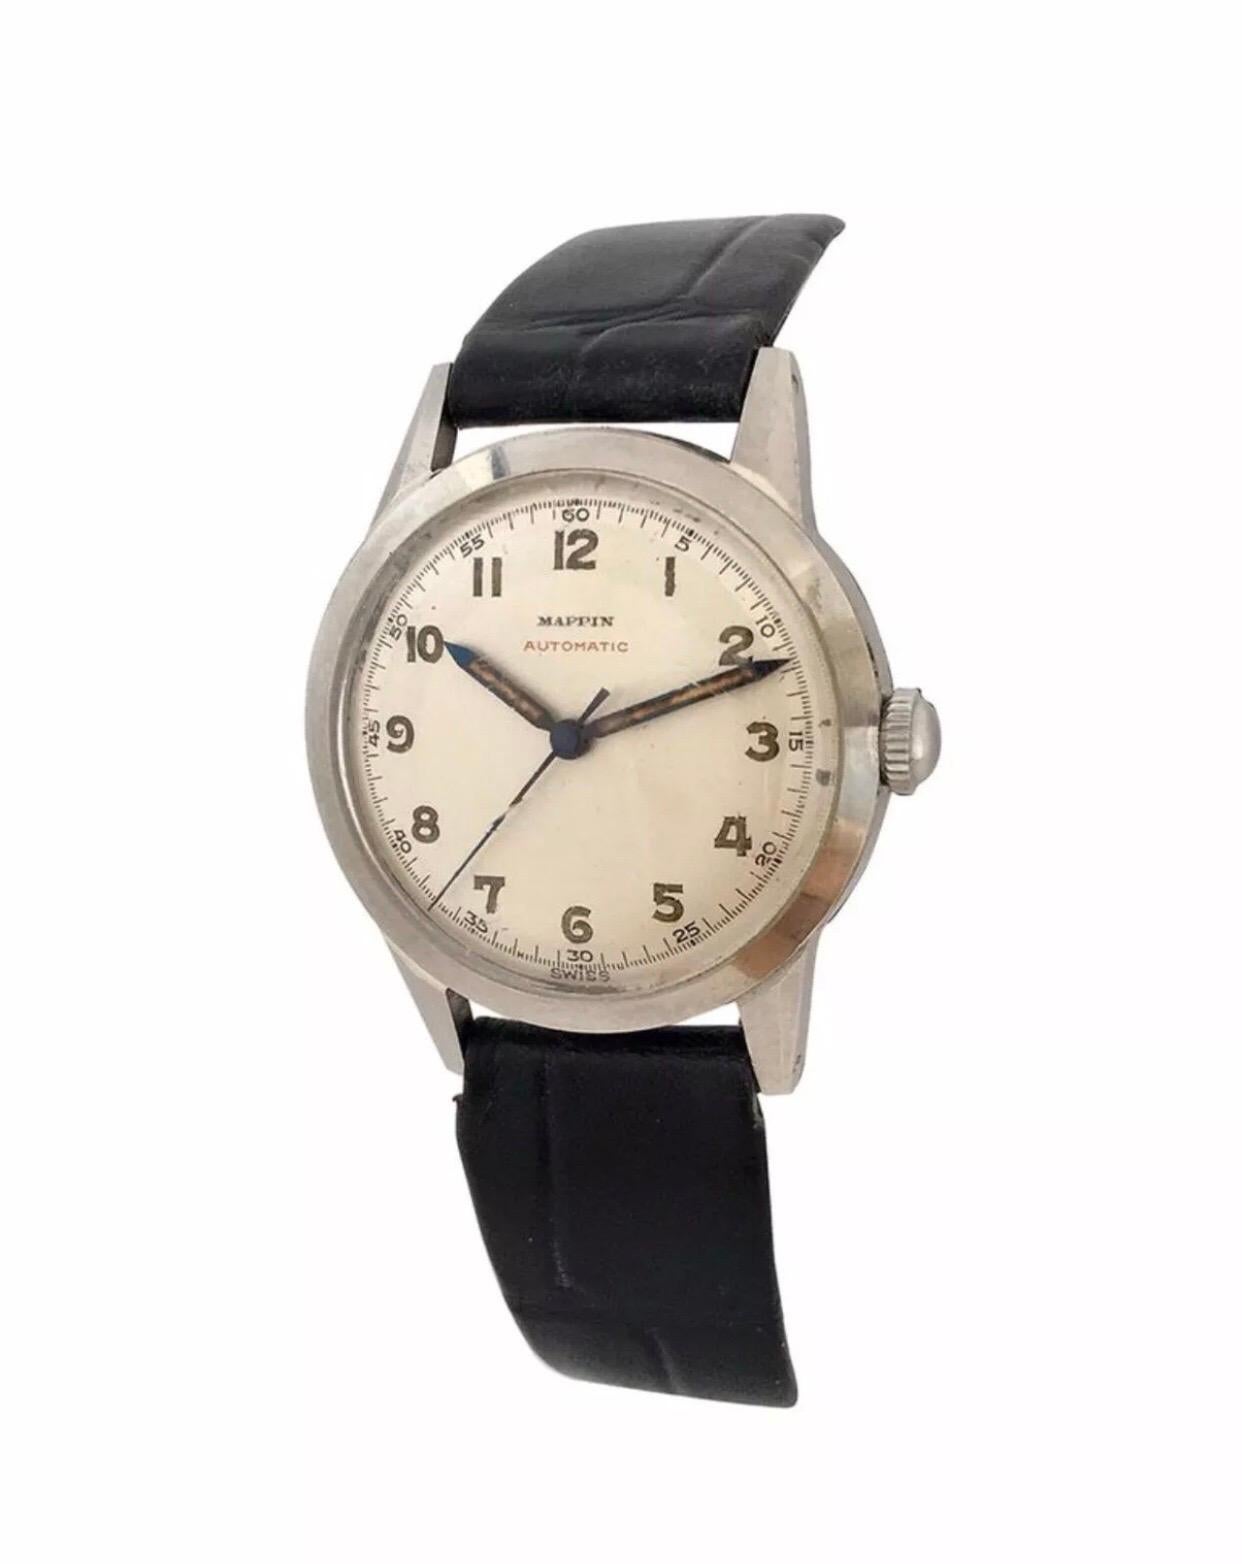 Vintage 1950s Mappin & Webb Stainless Steel Automatic with Sweep Seconds Watch For Sale 2